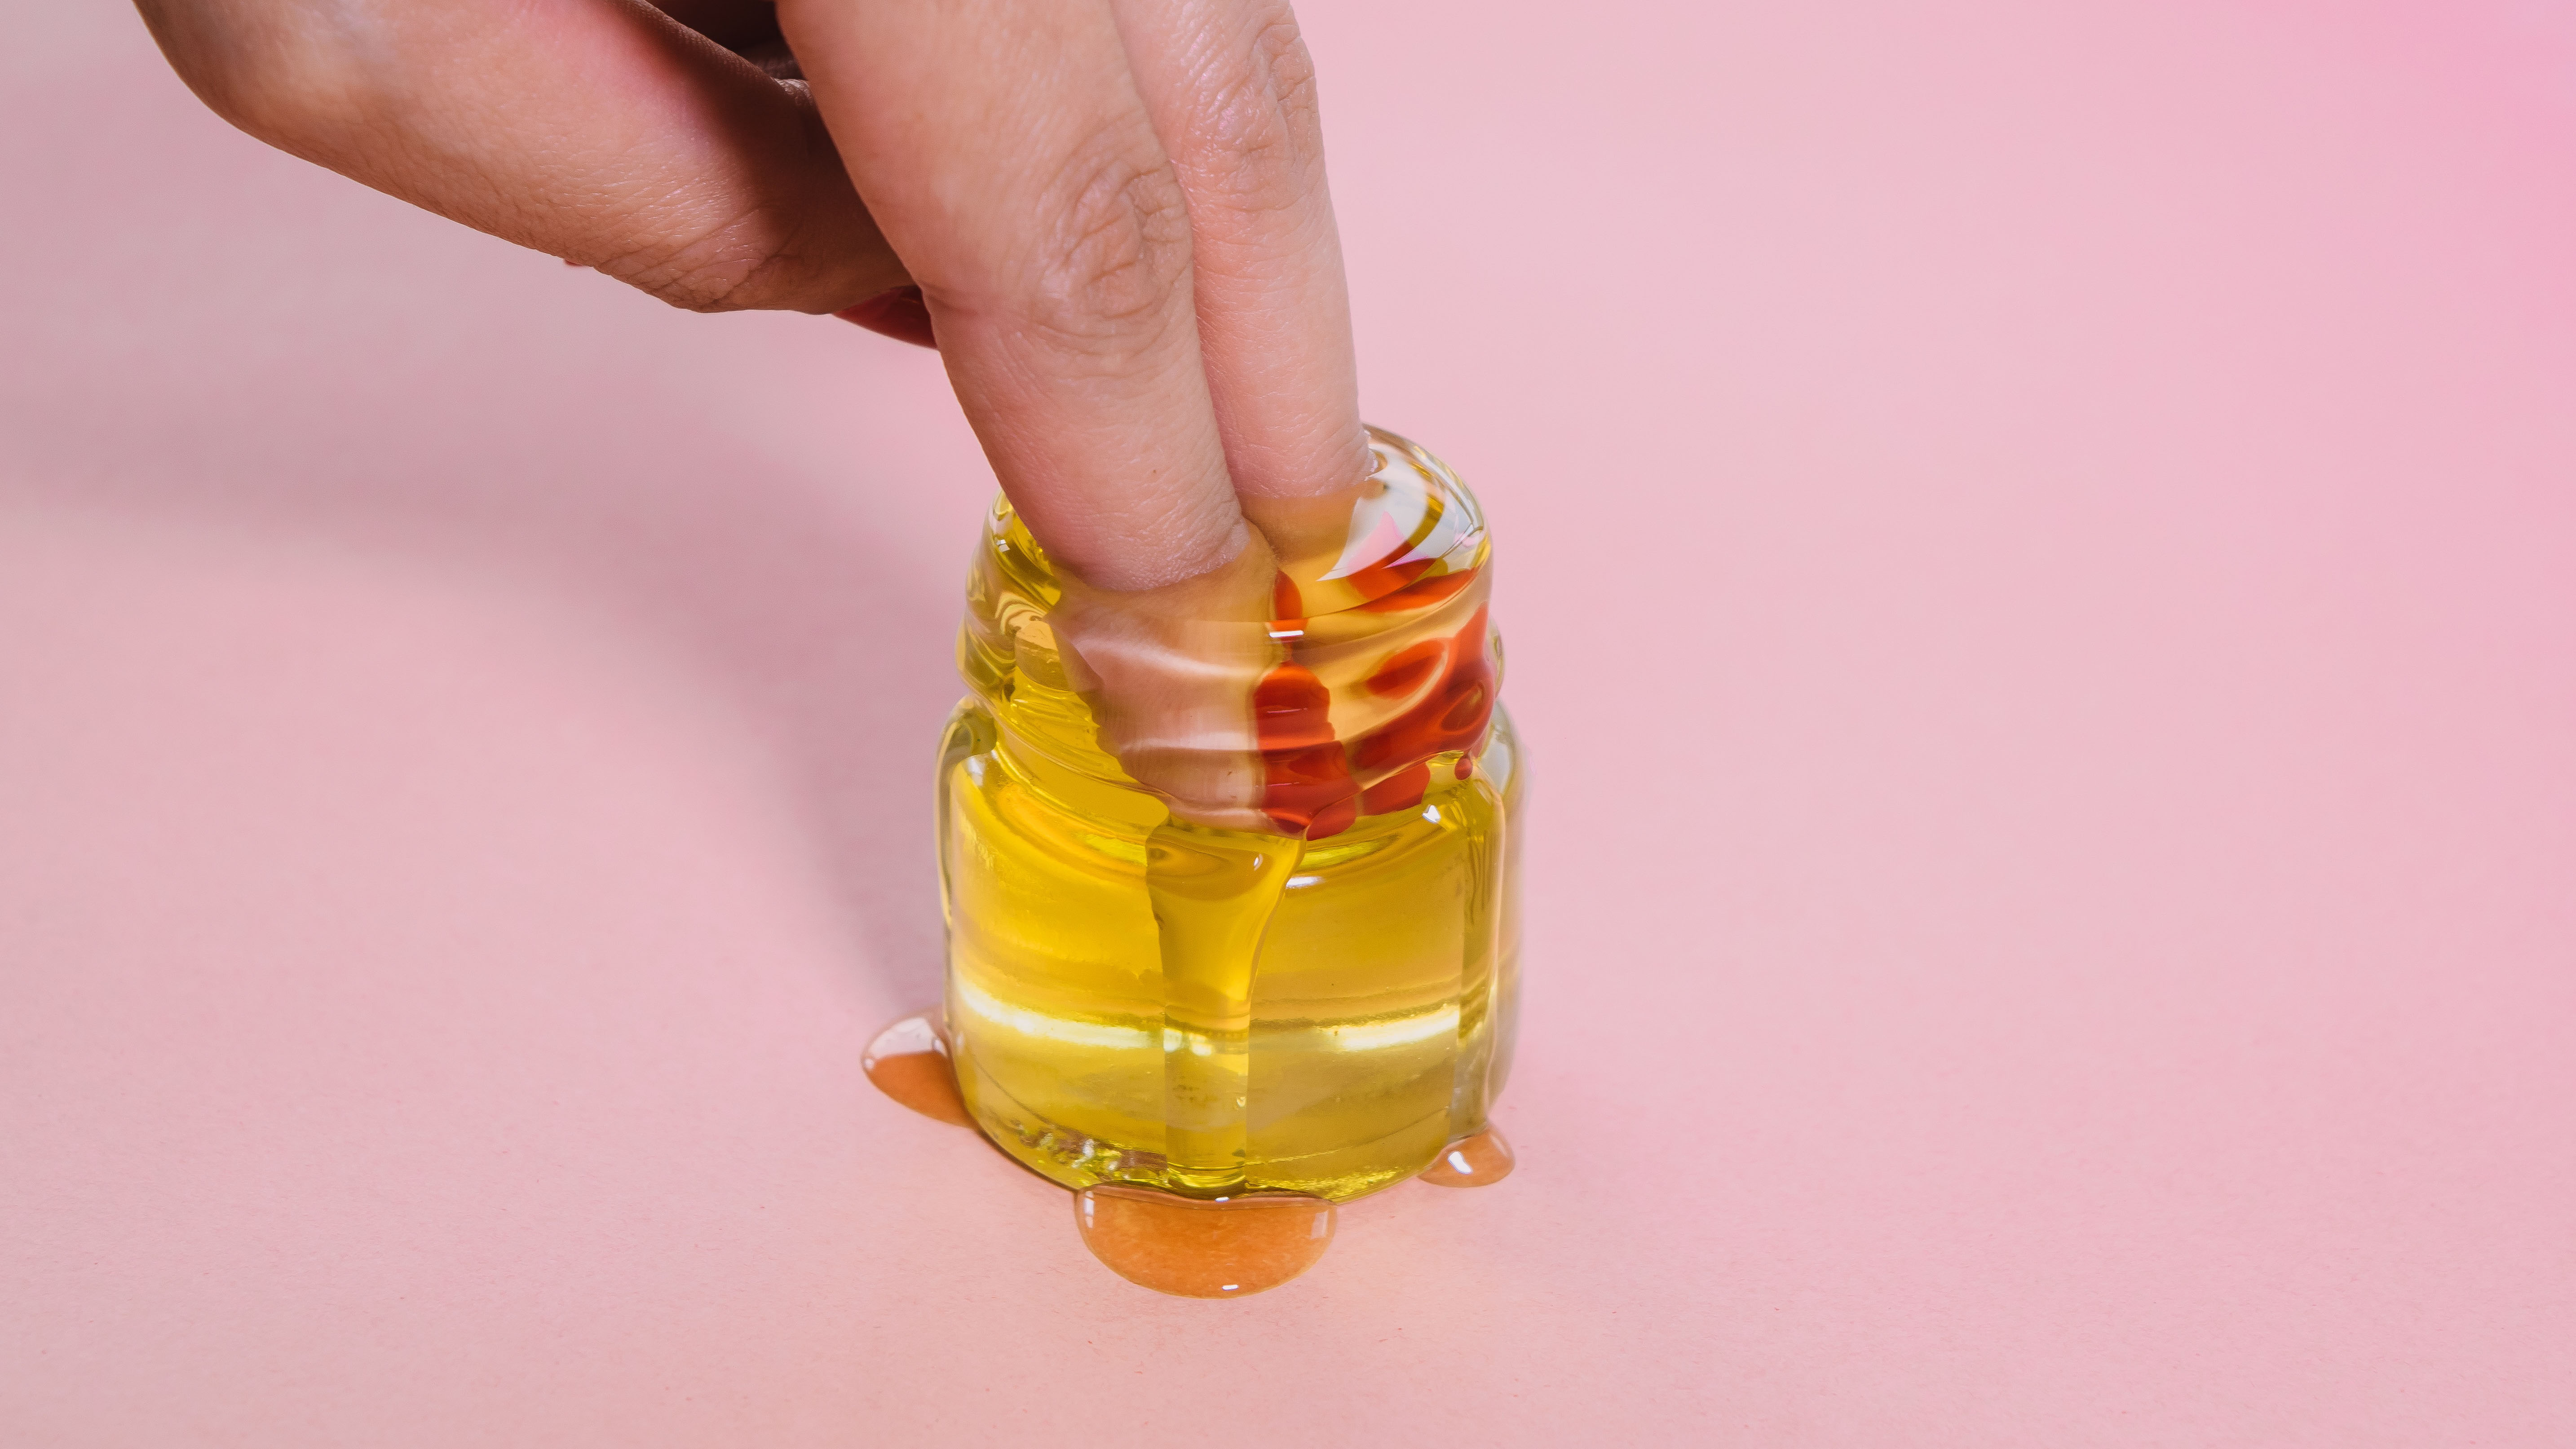 A person dipping two fingers into a glass jar of thc cooking oil